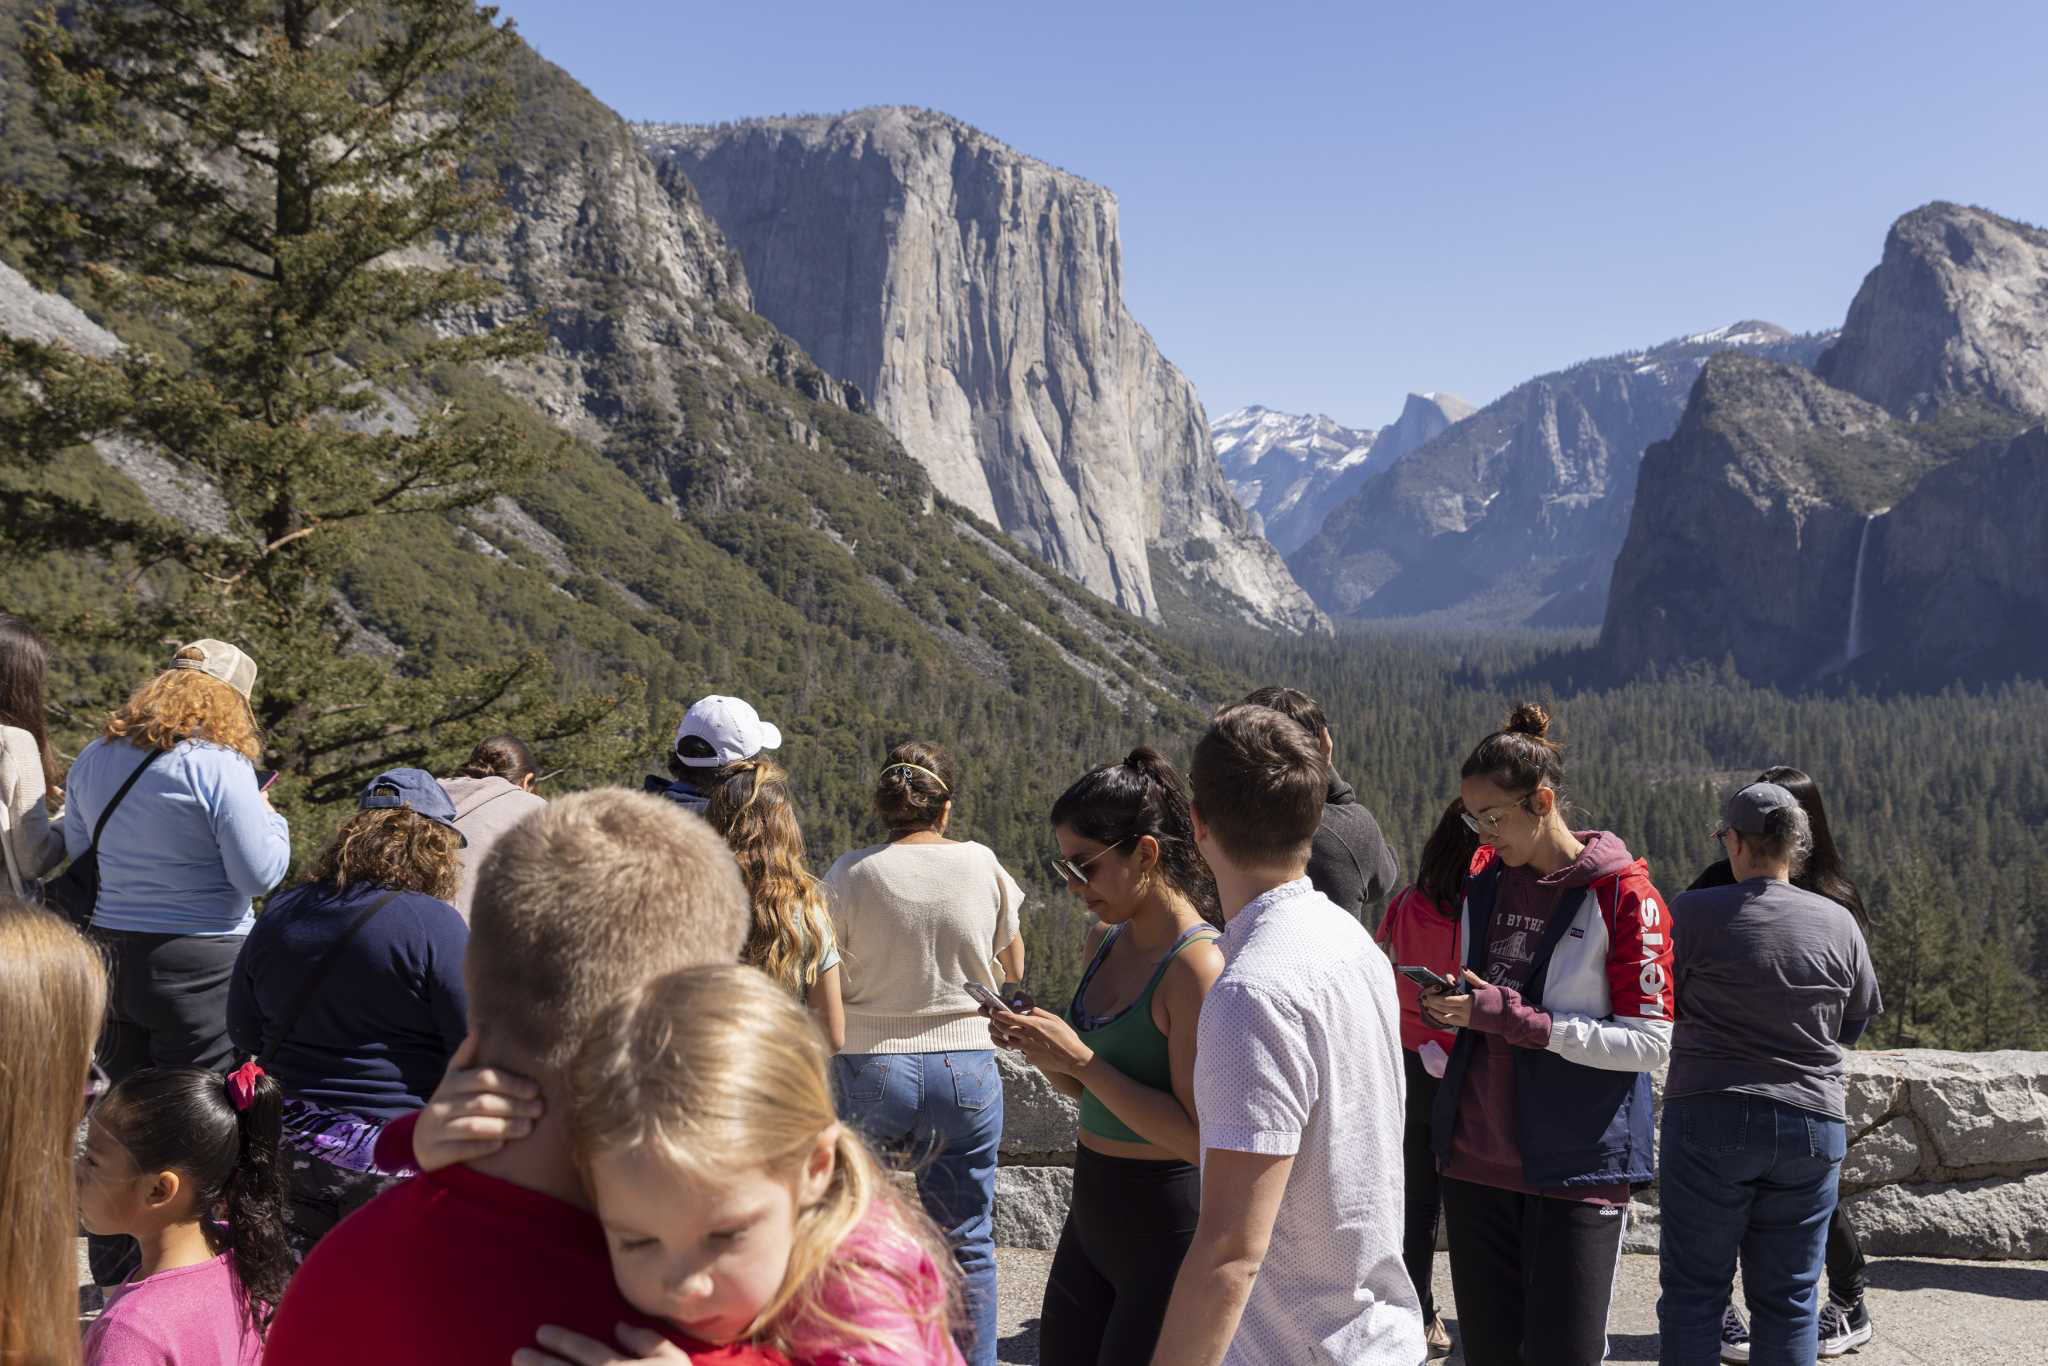 Yosemite National Park to require reservations in 2024. Here are the